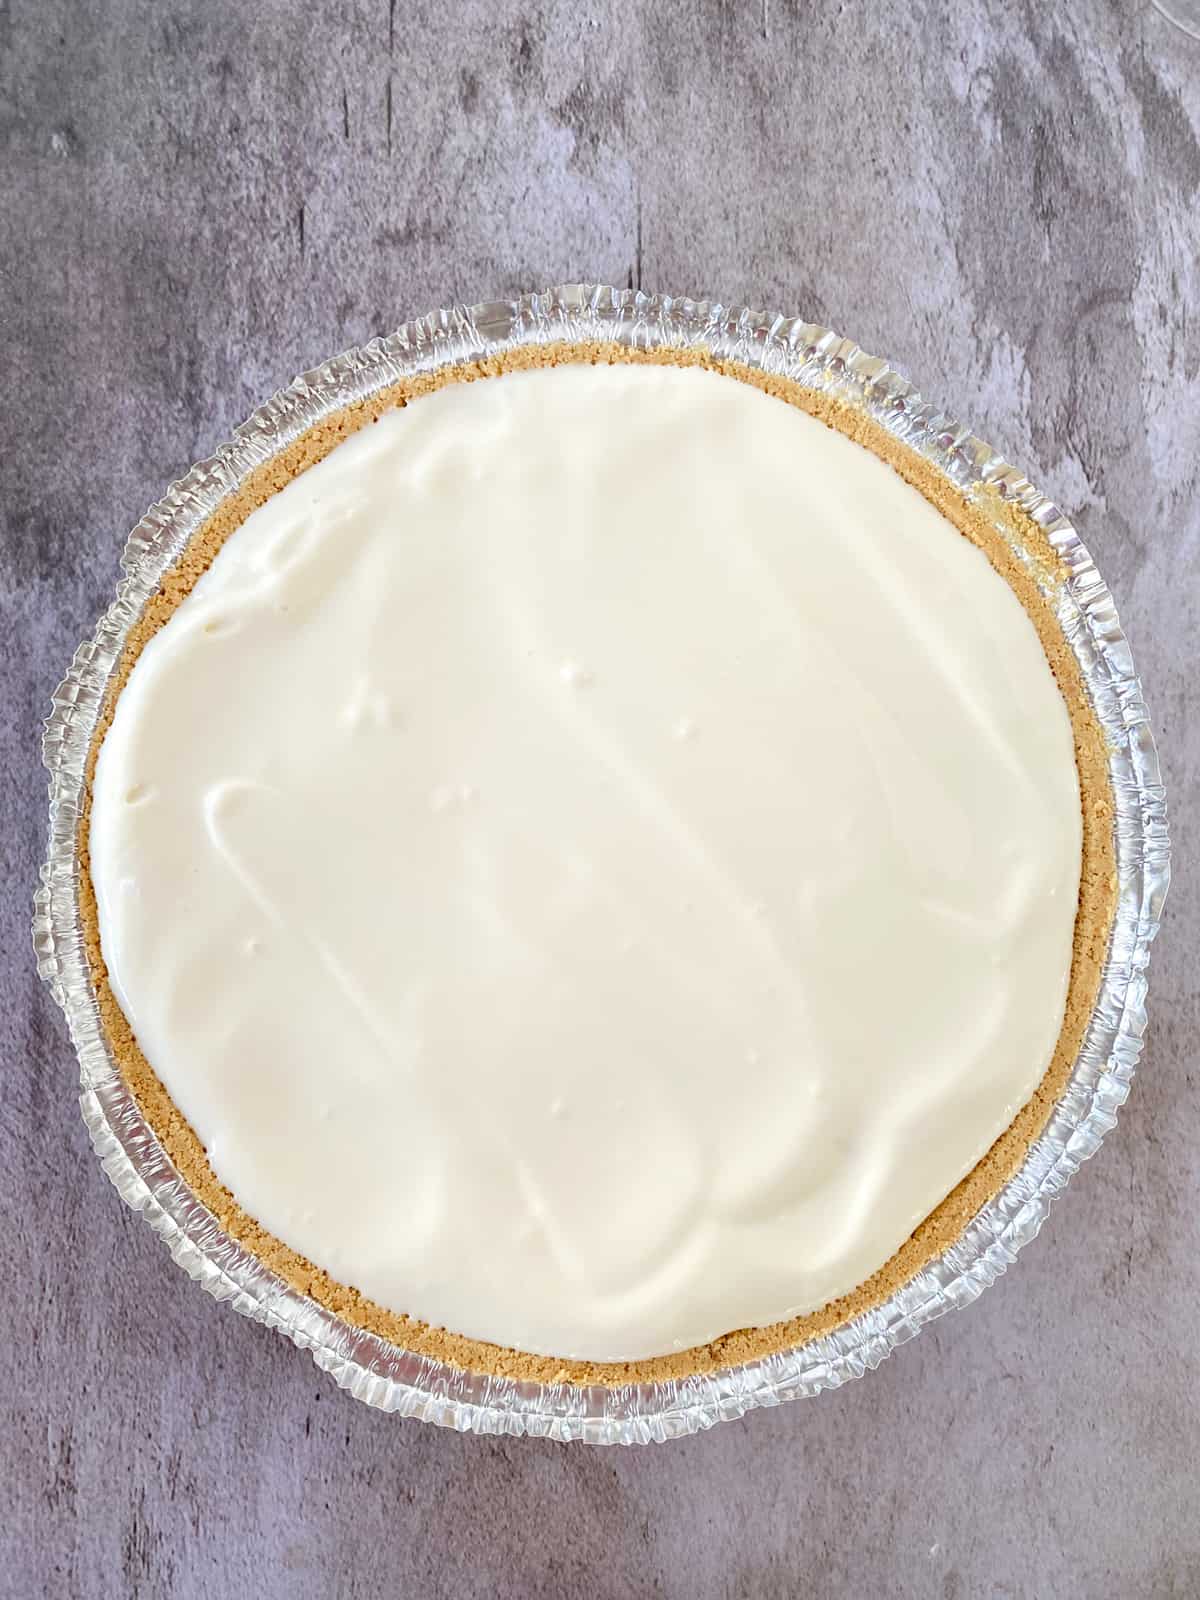 lemon pie assembled without whipped cream topping